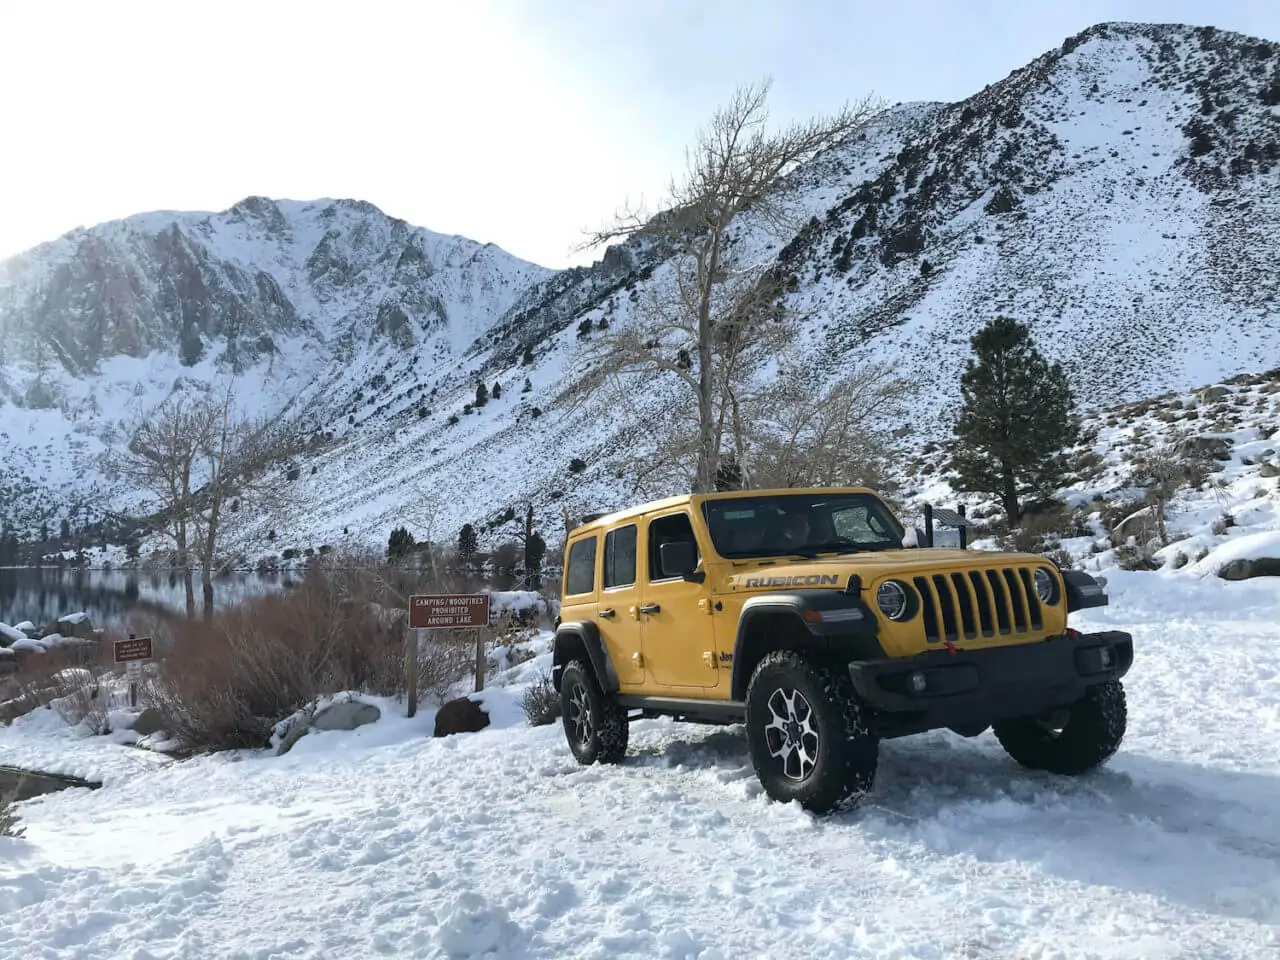 Is a Jeep Wrangler Soft Top a Bad Idea During Winter? - The Dirt by 4WP